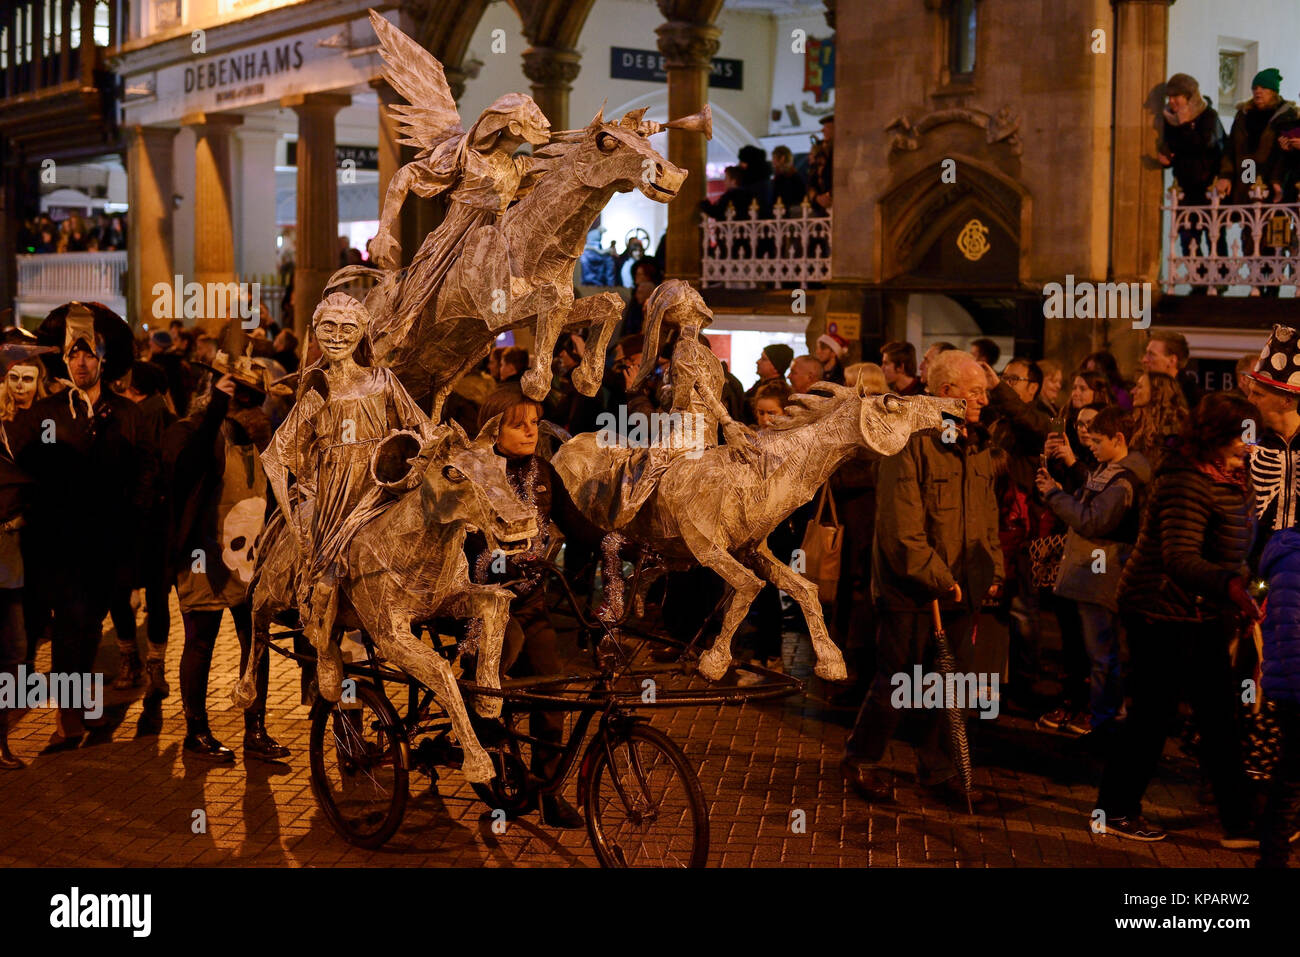 Chester, UK. 14th December 2017. A cyclist takes part in the annual Winter Watch parade through the city centre. The parade involves musicians, street theatre and costume performances with characters including angels, devils, skeletons and dragons. Credit: Andrew Paterson/Alamy Live News Stock Photo